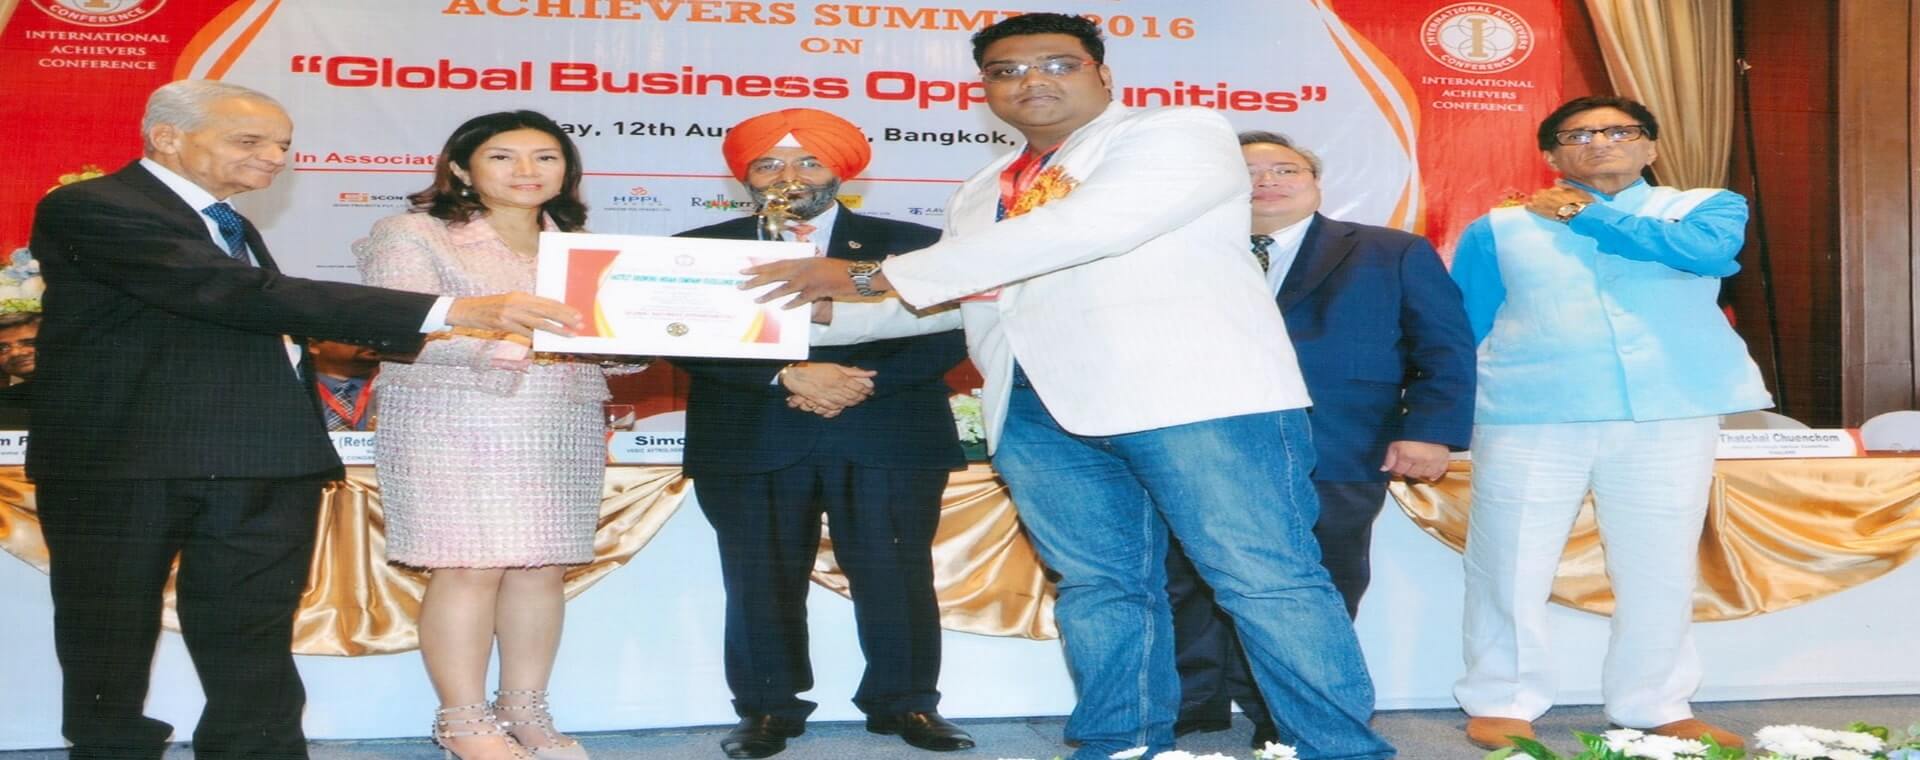 Fastest Growing Indian Company Excellence Award